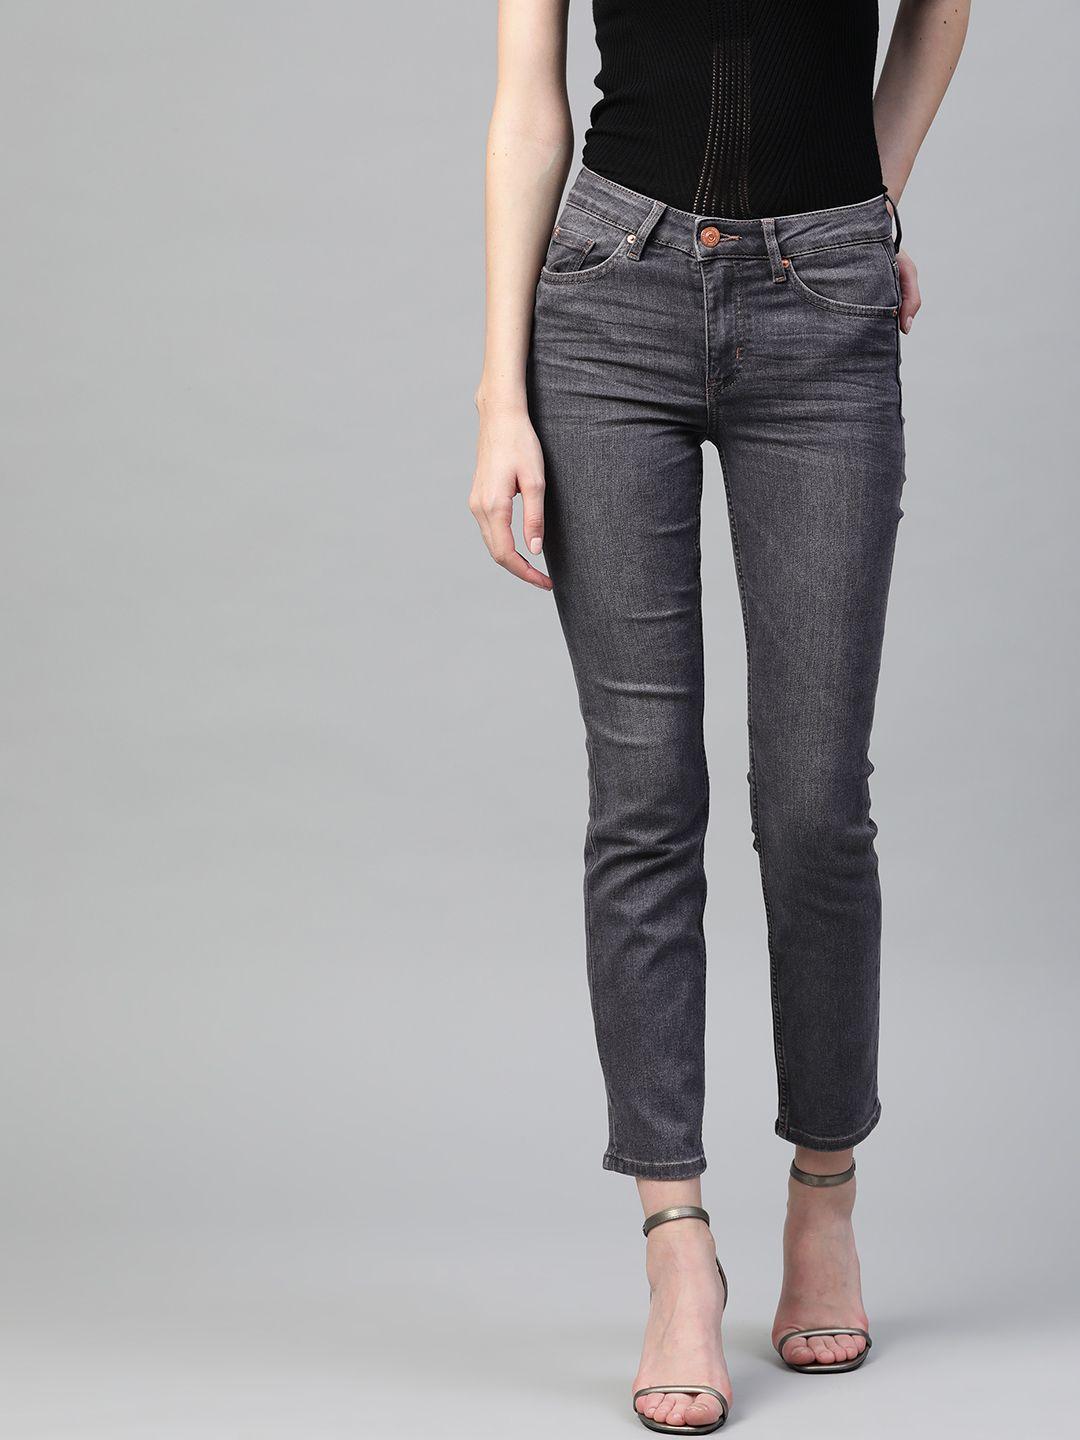 marks & spencer women charcoal grey slim fit mid-rise clean look stretchable jeans